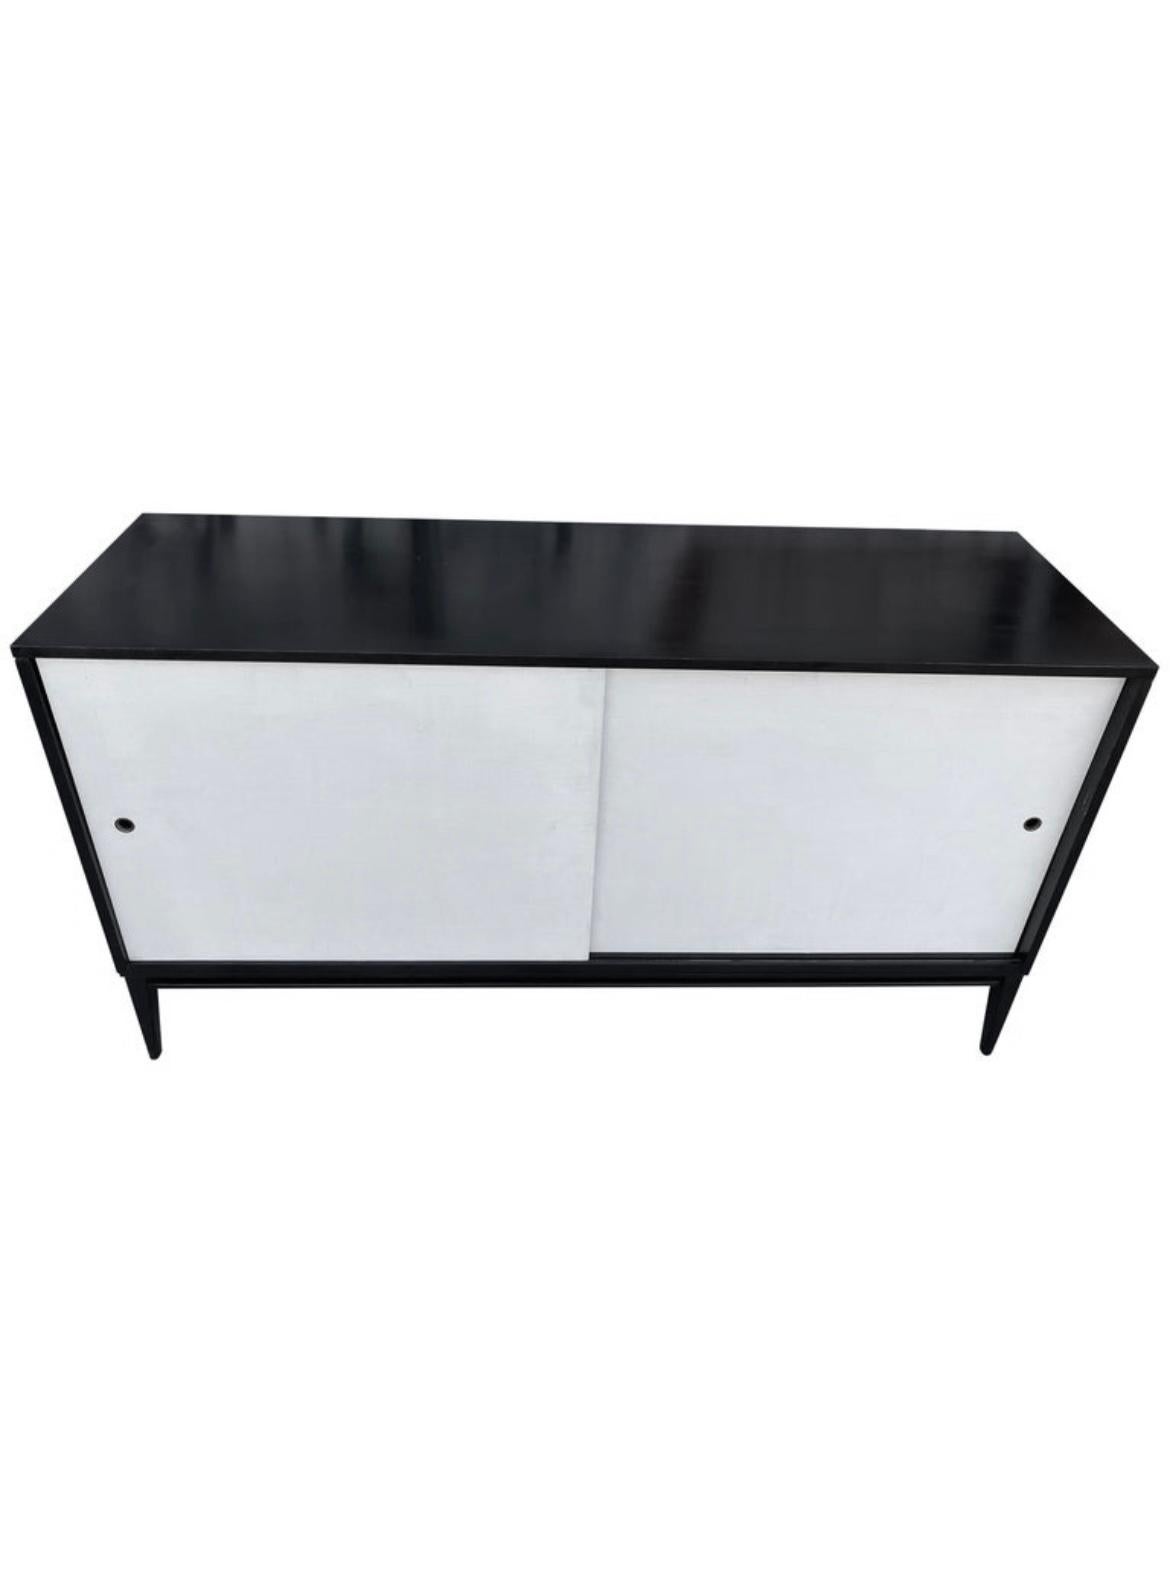 20th Century Midcentury White Door Credenza Paul McCobb Planner Group #1514 Black Lacquer For Sale